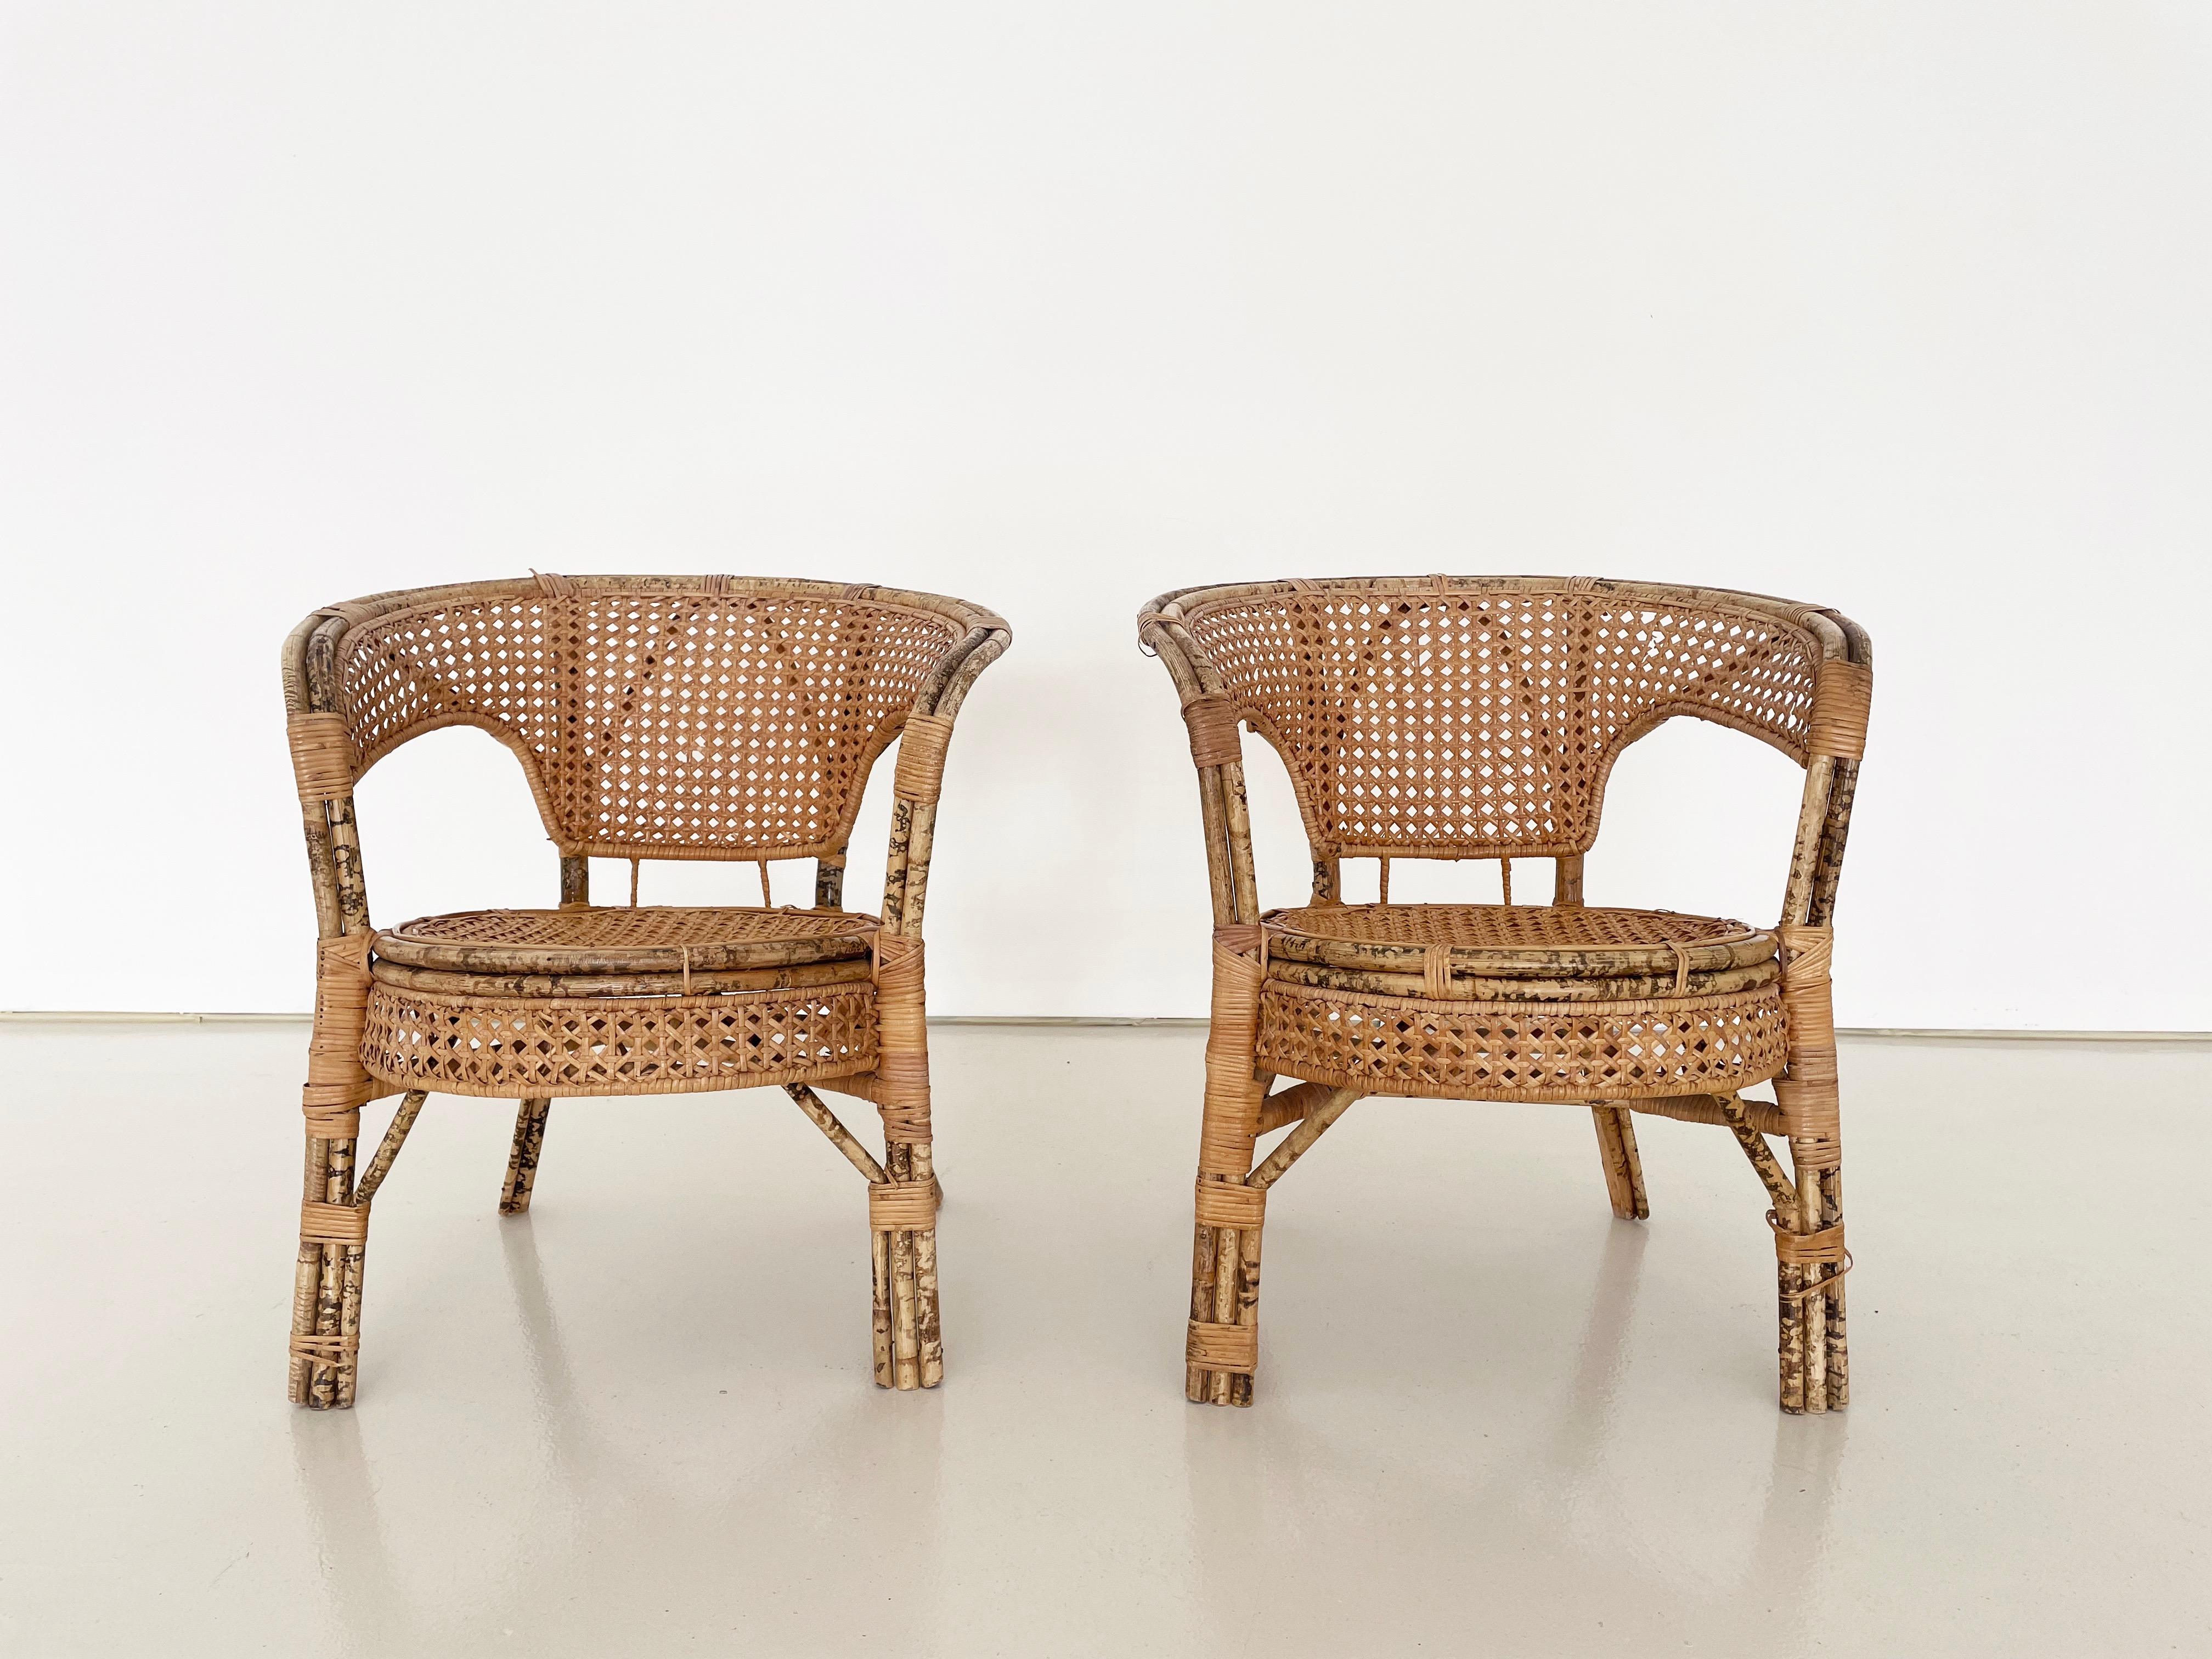 Midcentury bent bamboo Rattan and Cane Armchairs, Set of 2

Minor flaking of the clear coat in a few places on each chair (see images)

No structural damage

A few small spots of missing wrapped flat Rattan on the legs, no structural concerns.